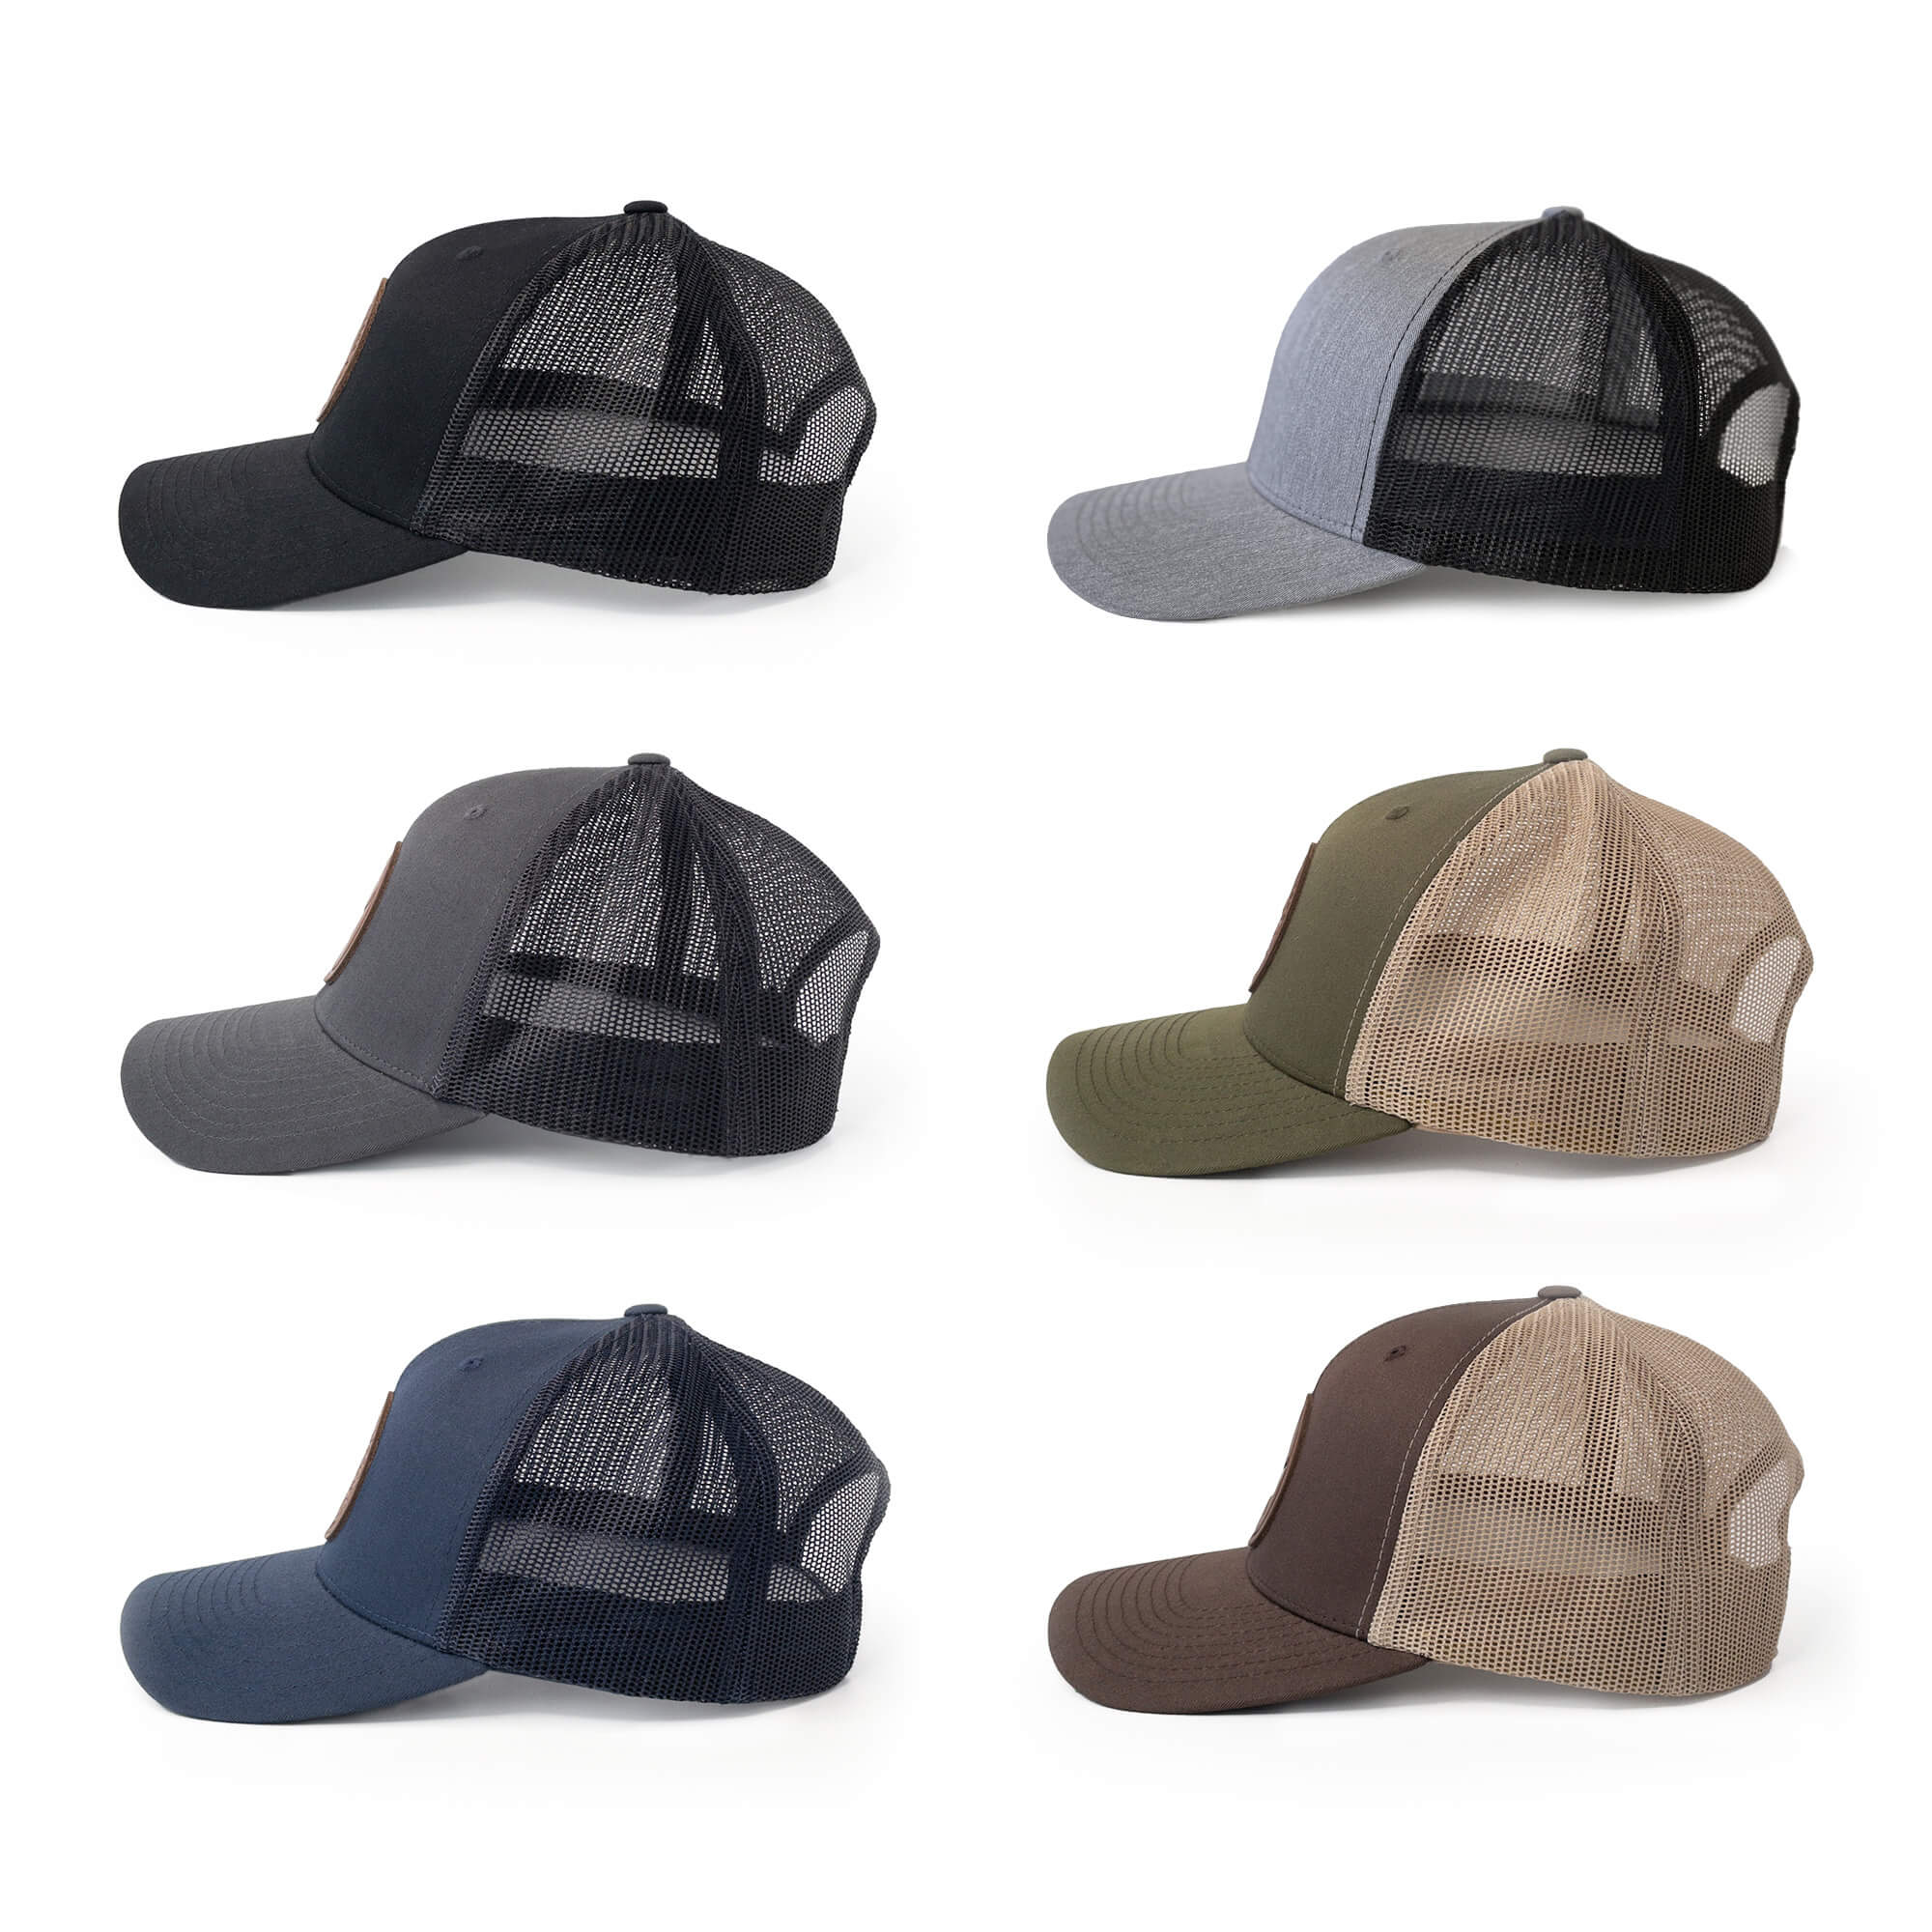 Leather patch trucker hats available in 6 colors | BLACK-004-010, CHARC-004-010, NAVY-004-010, HGREY-004-010, MOSS-004-010, BROWN-004-010